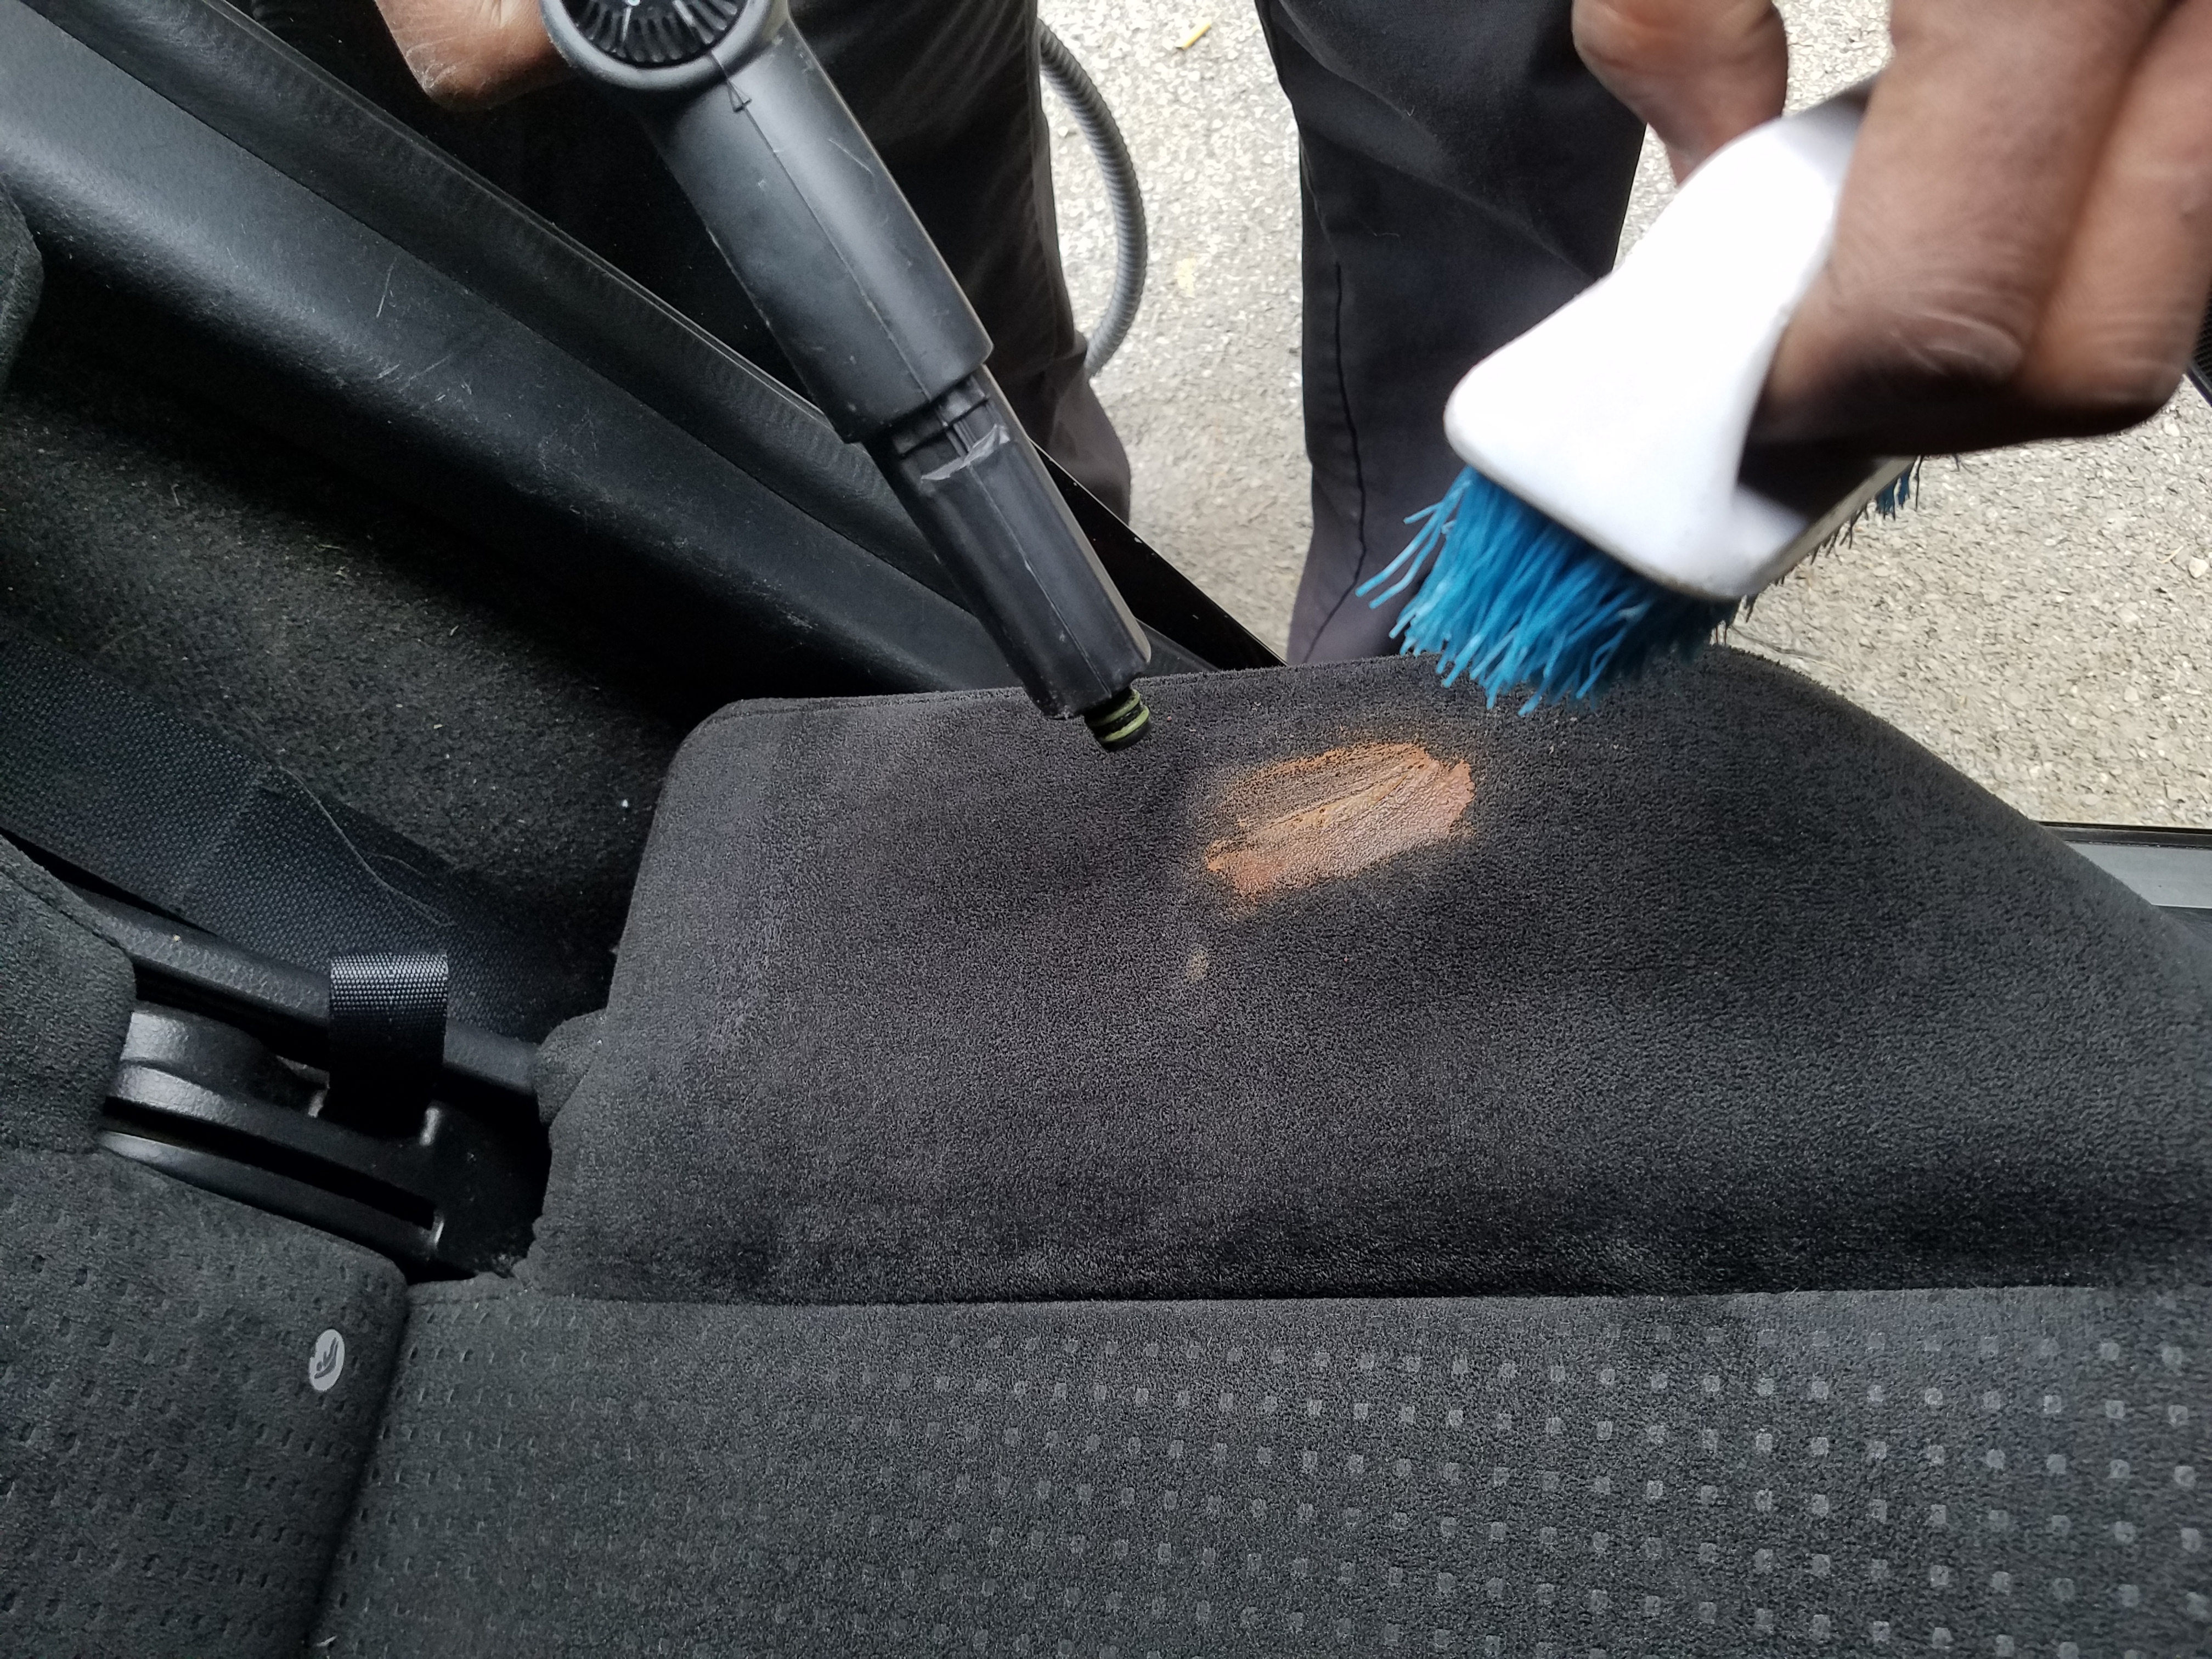 How to Remove Chocolate Stains from Car Seats